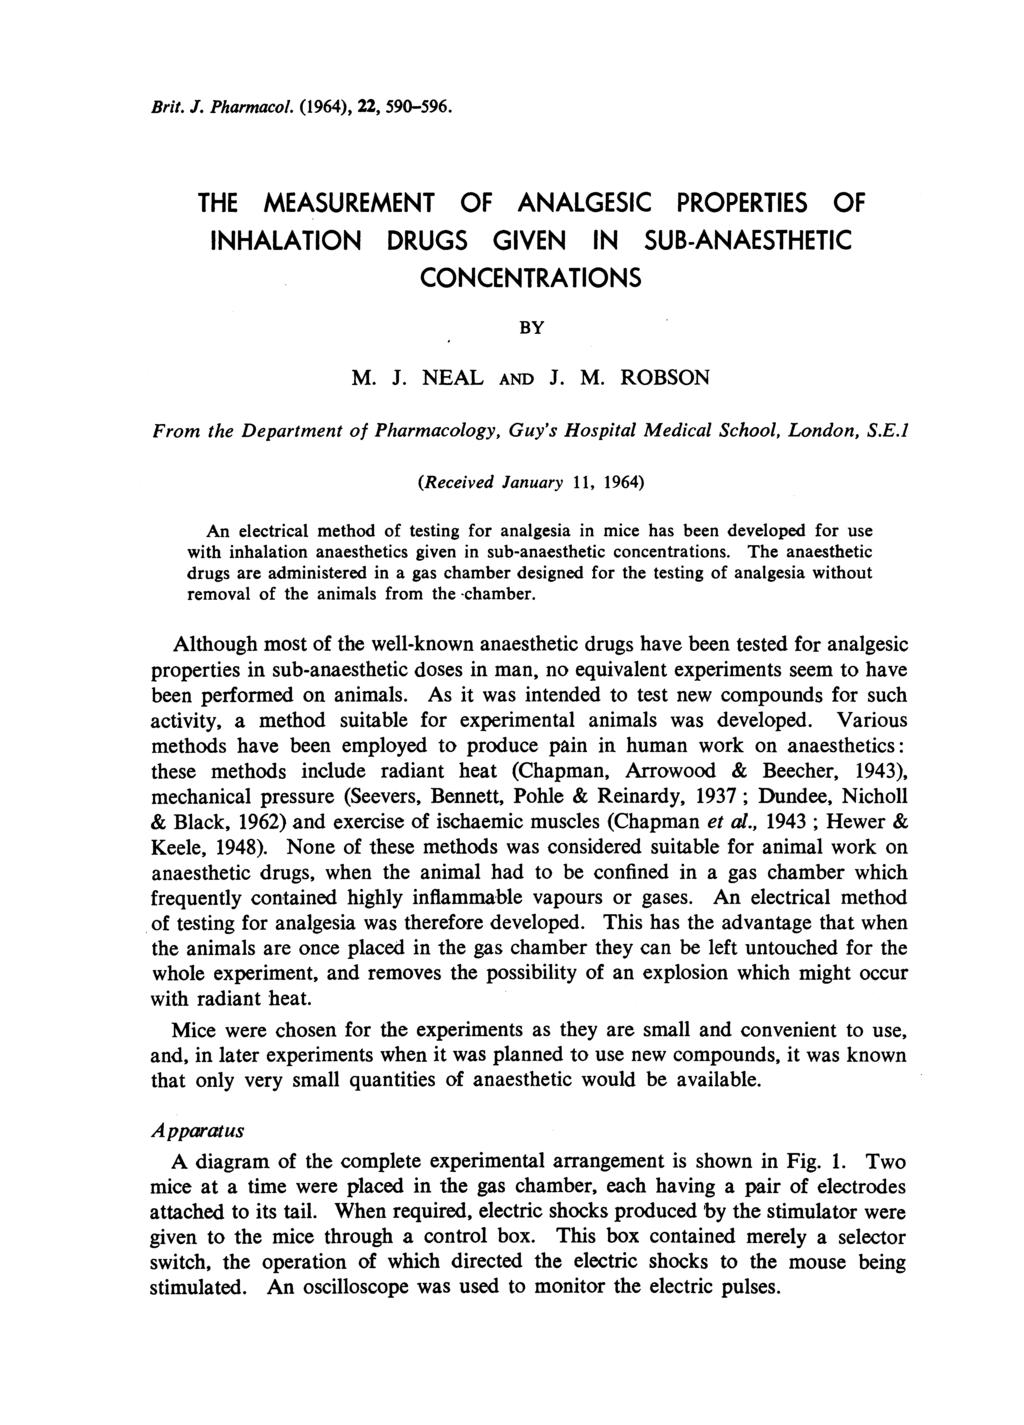 Brit. J. Pharmacol. (1964), 22, 590-596. THE MEASUREMENT OF ANALGESIC PROPERTIES OF INHALATION DRUGS GIVEN IN SUB-ANAESTHETIC CONCENTRATIONS BY M. J. NEAL AND J. M. ROBSON From the Department of Pharmacology, Guy's Hospital Medical School, London, S.